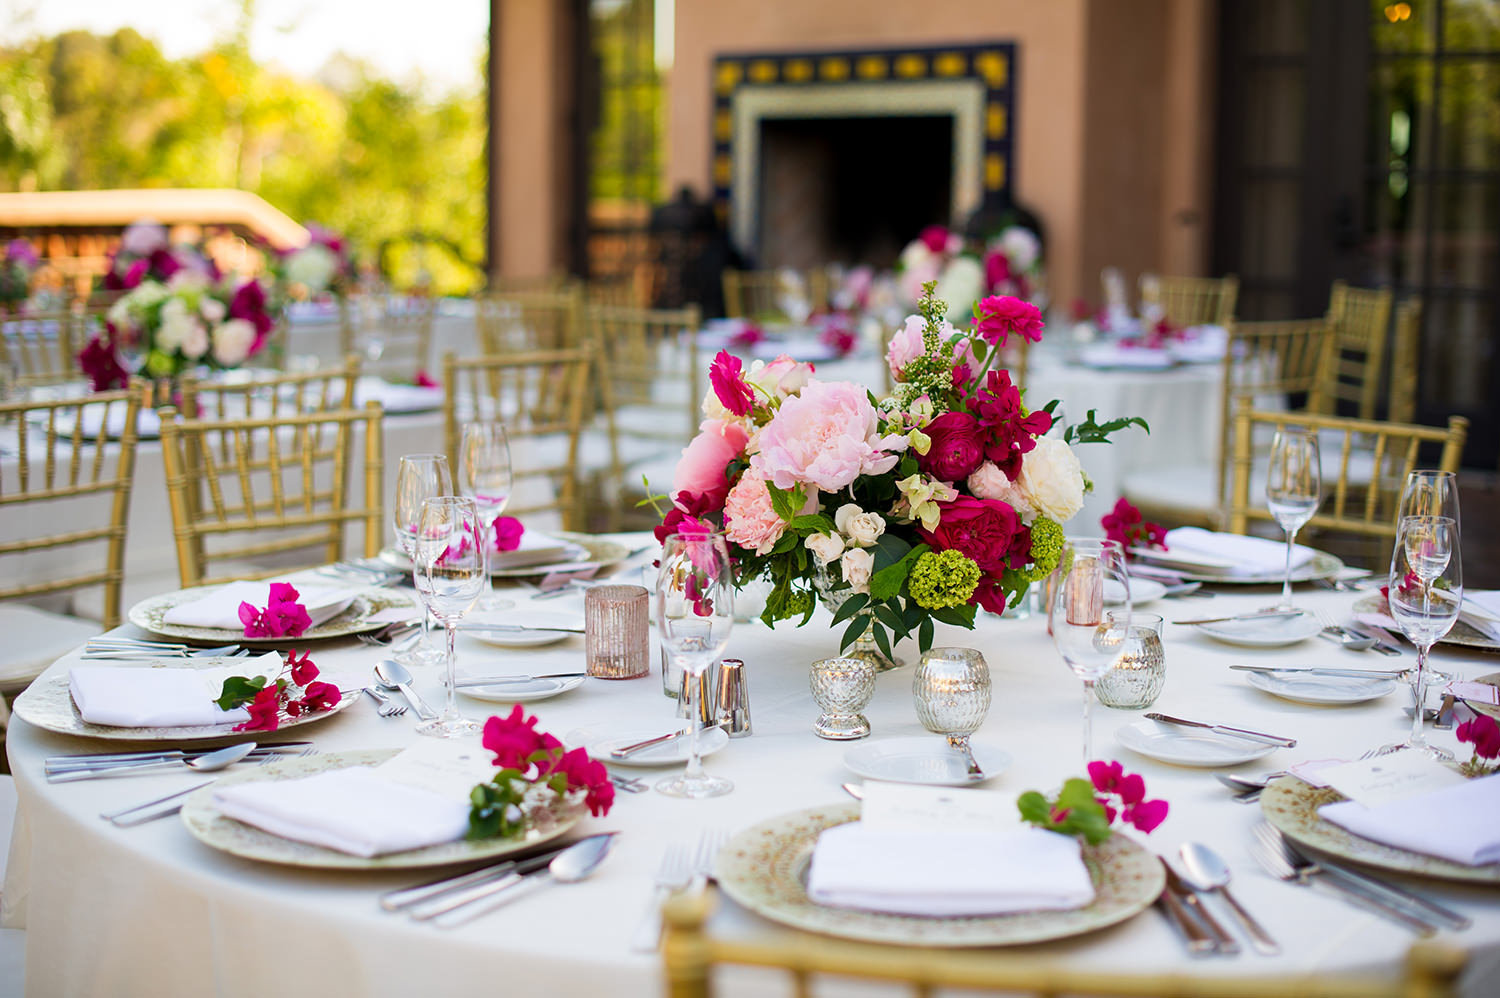 Delightful use of florals and color to make this reception table setting shine